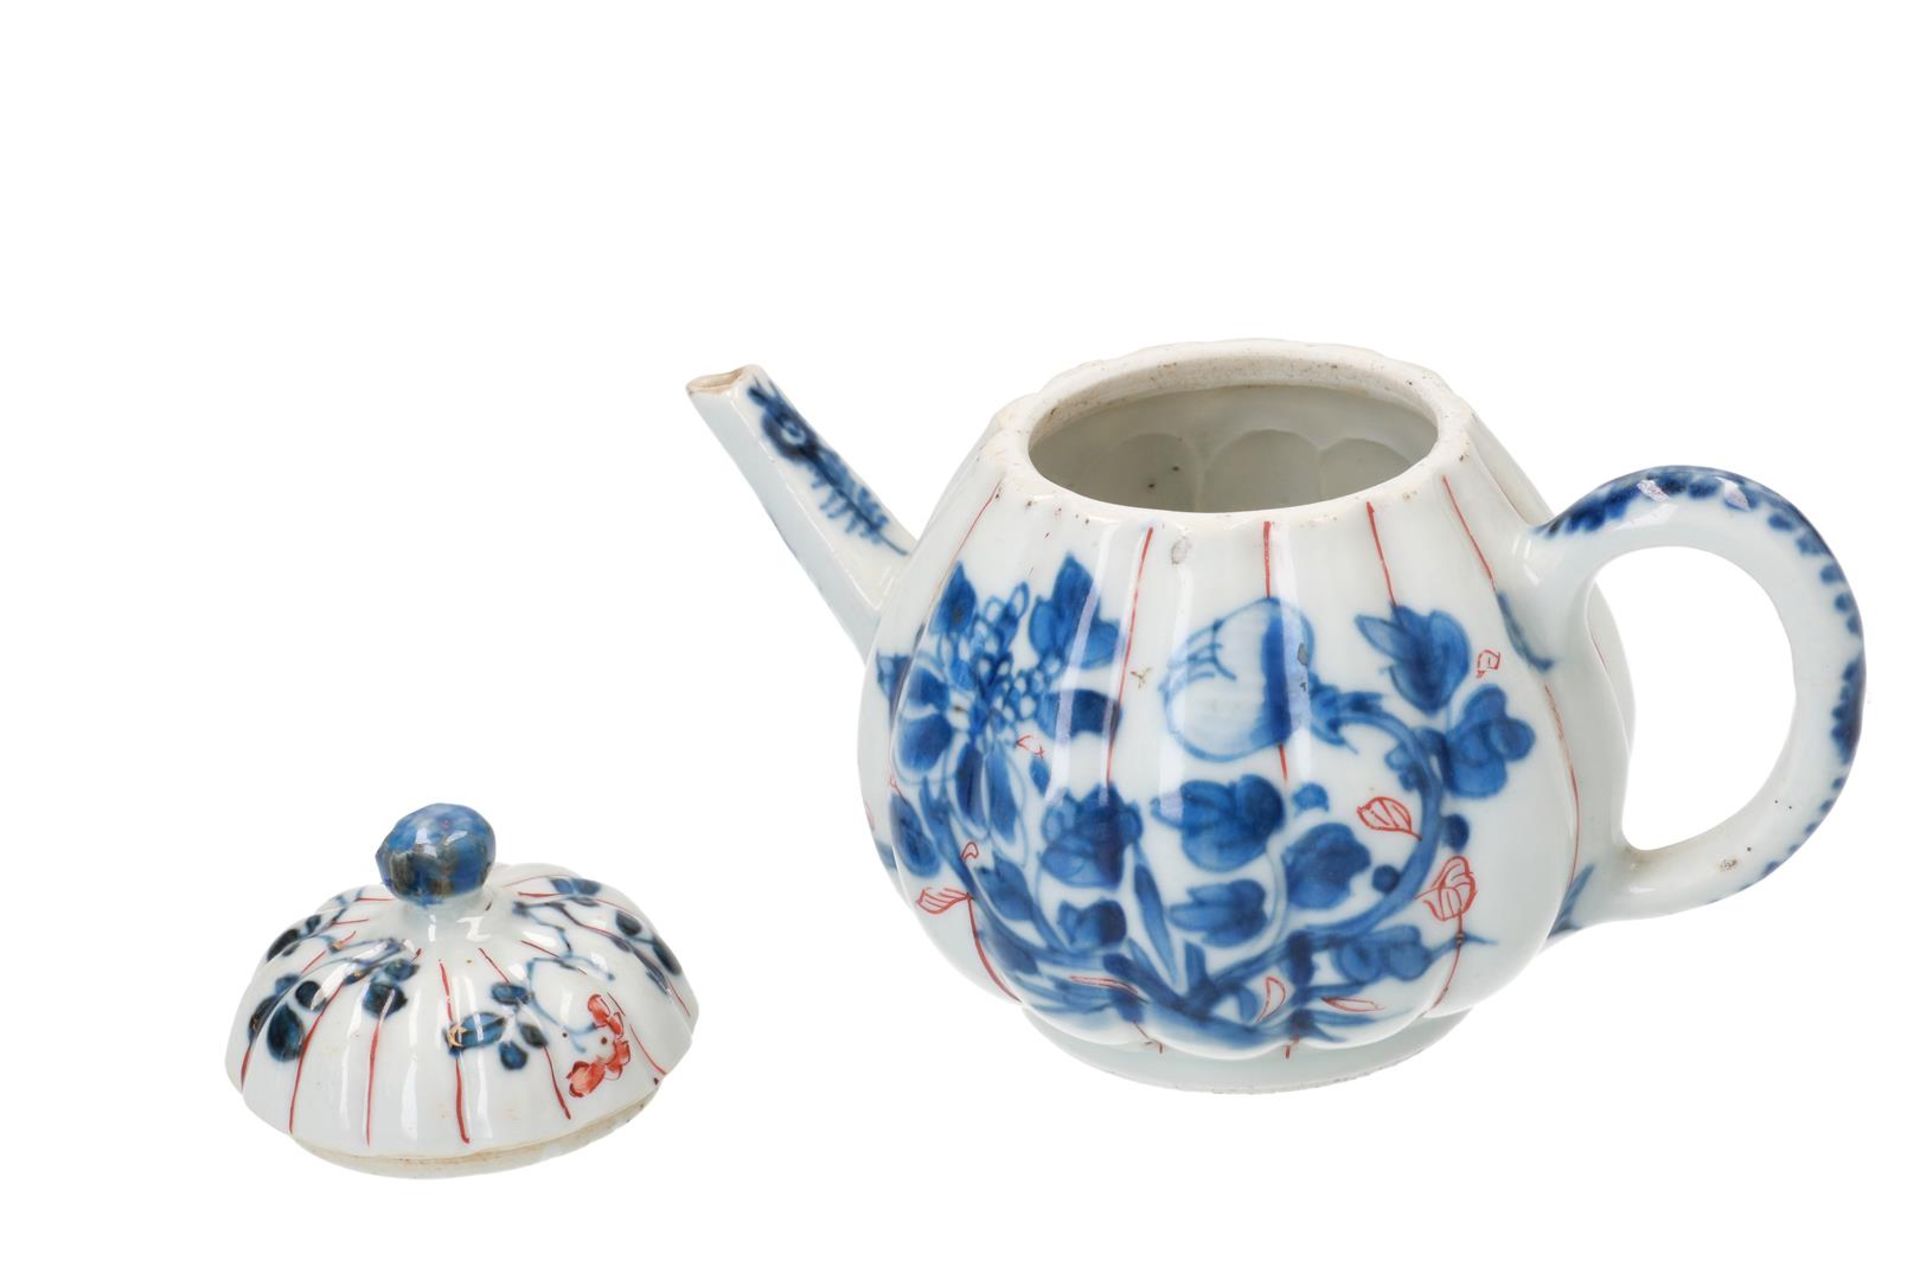 A pair of Imari porcelain teapots with lobbed belly and floral decor. Unmarked. China, 18th century. - Image 5 of 6